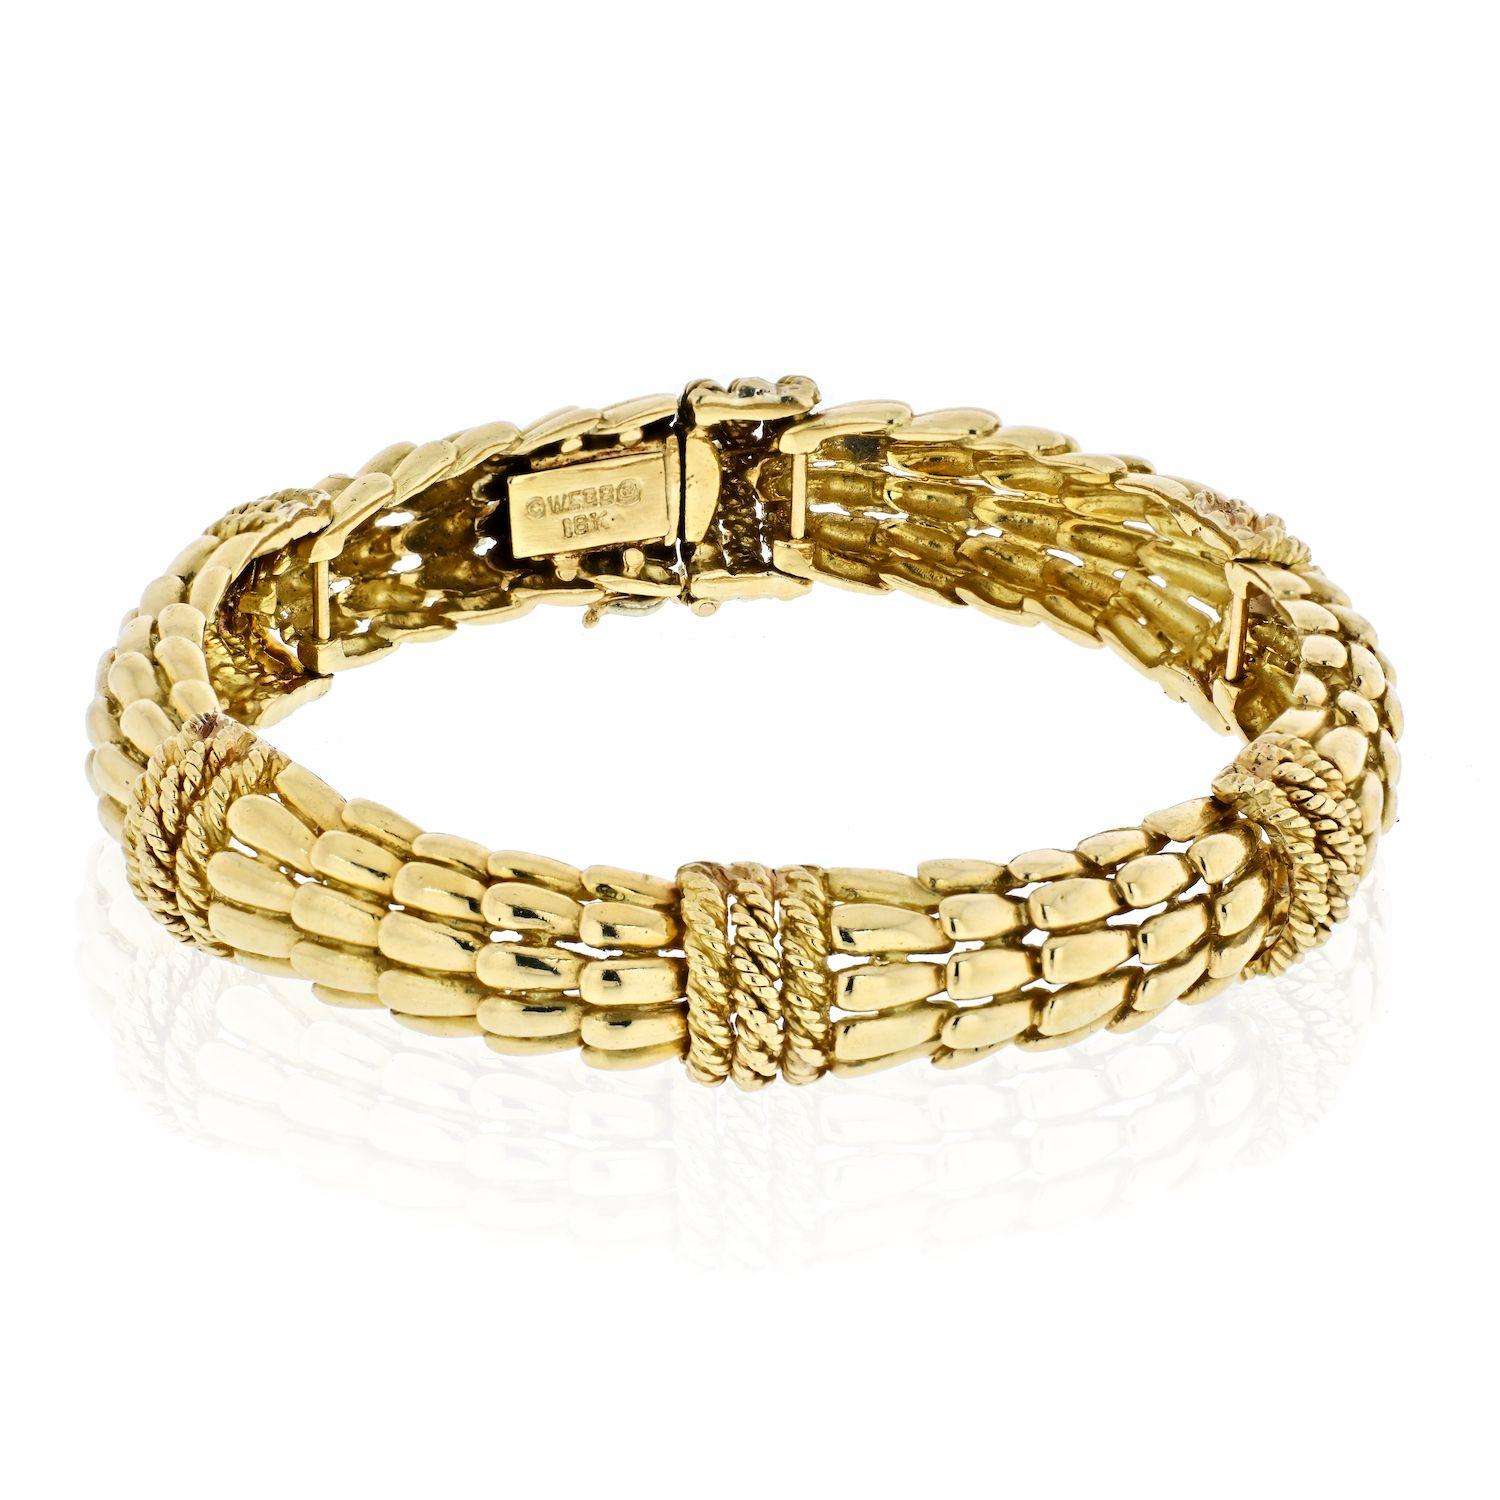 Dating from the 1970s, this gold bracelet is composed of beautifully braided and 